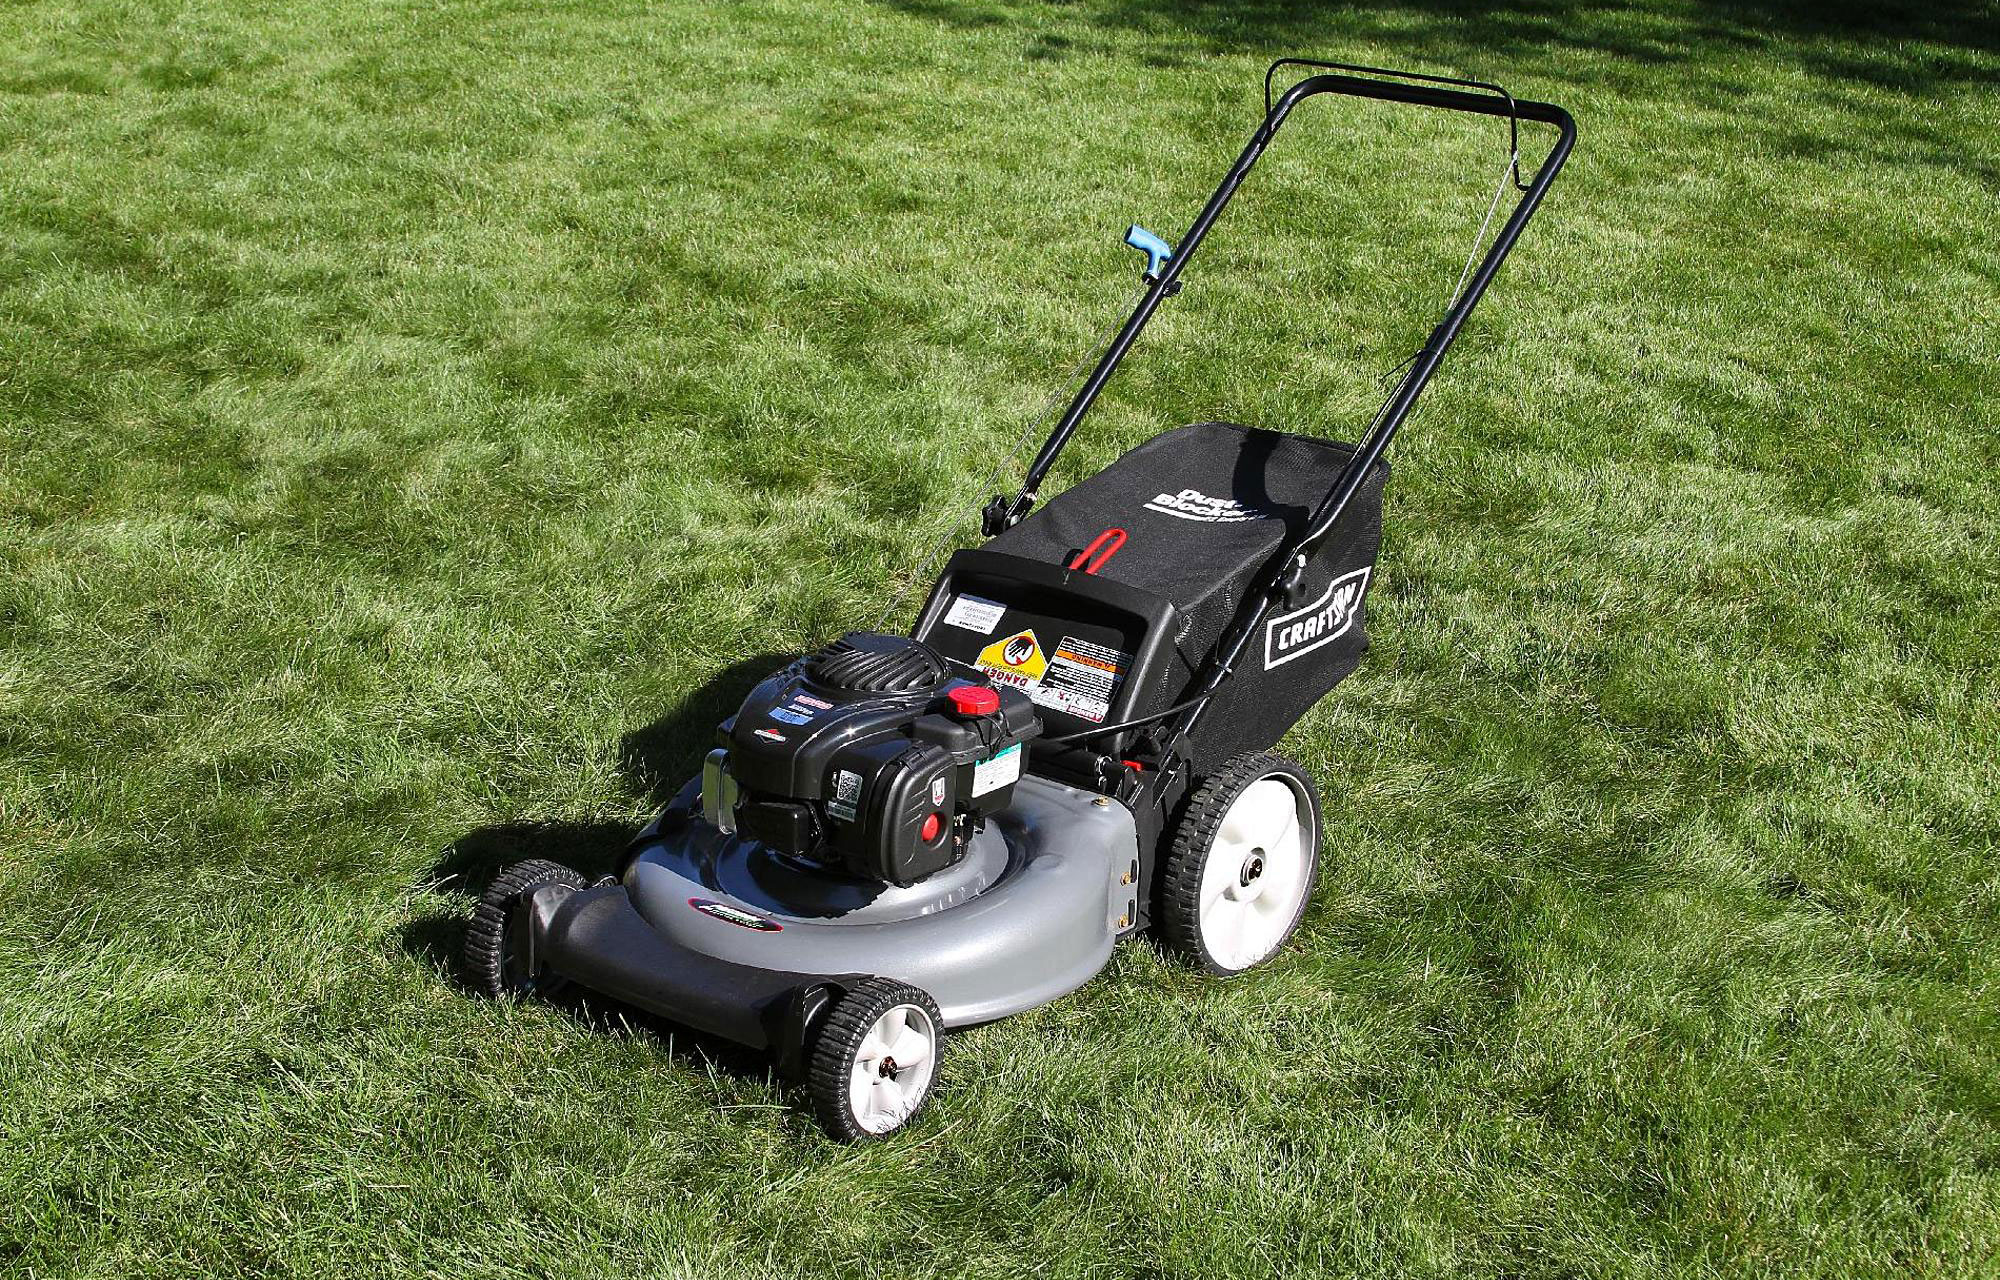 Craftsman 37430 21 Inch 140cc Briggs and Stratton Gas Powered 3 in 1